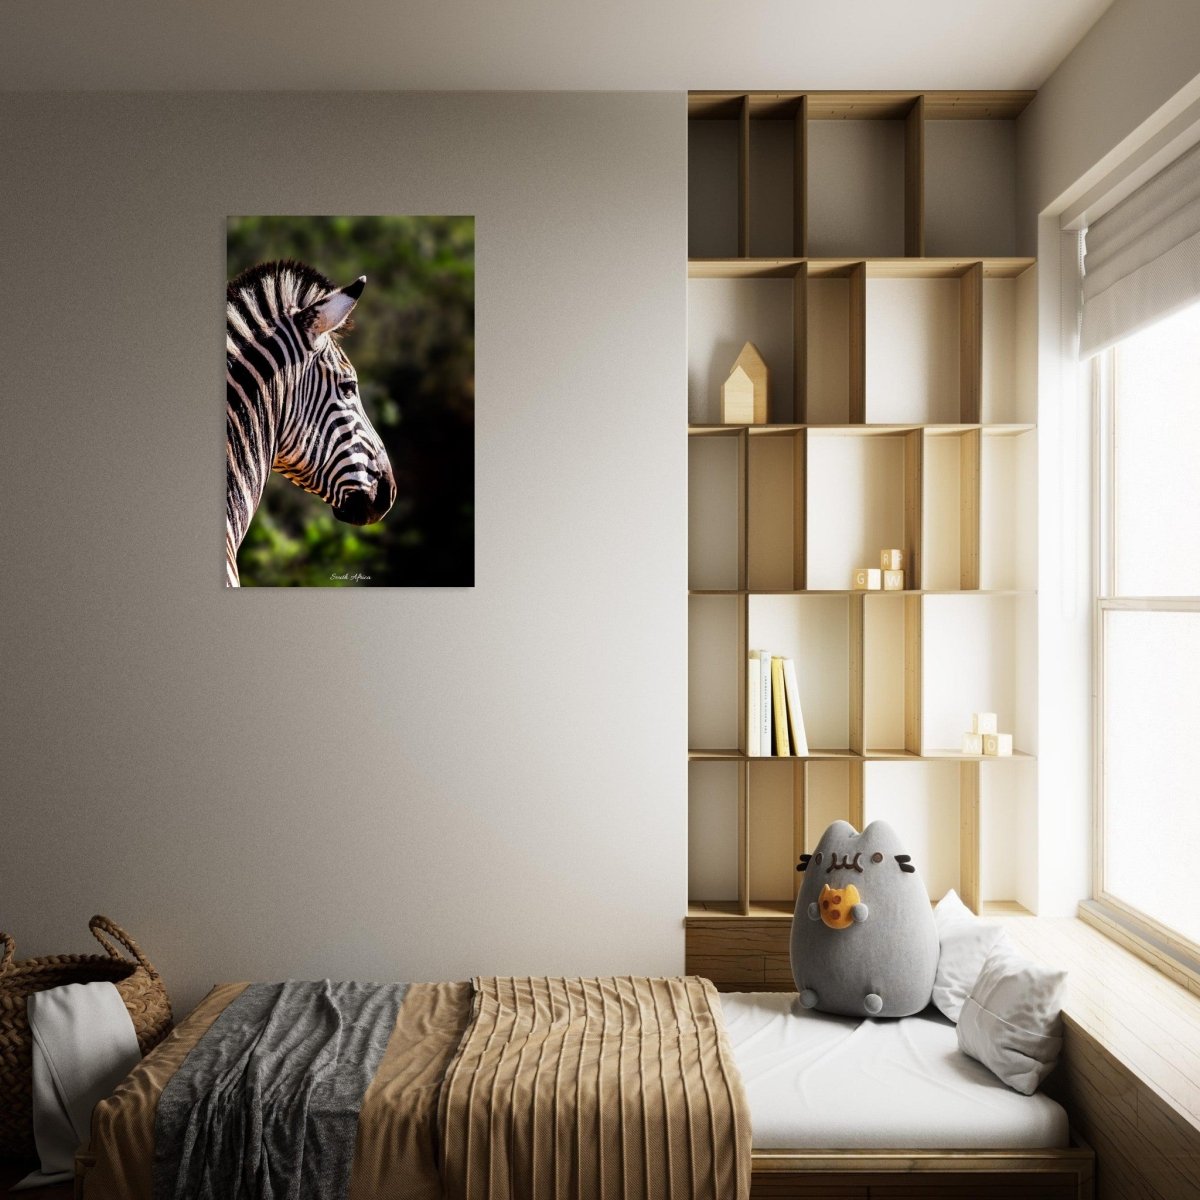 30x45 cm / 12x18″ Stunning Zebra by Picture This